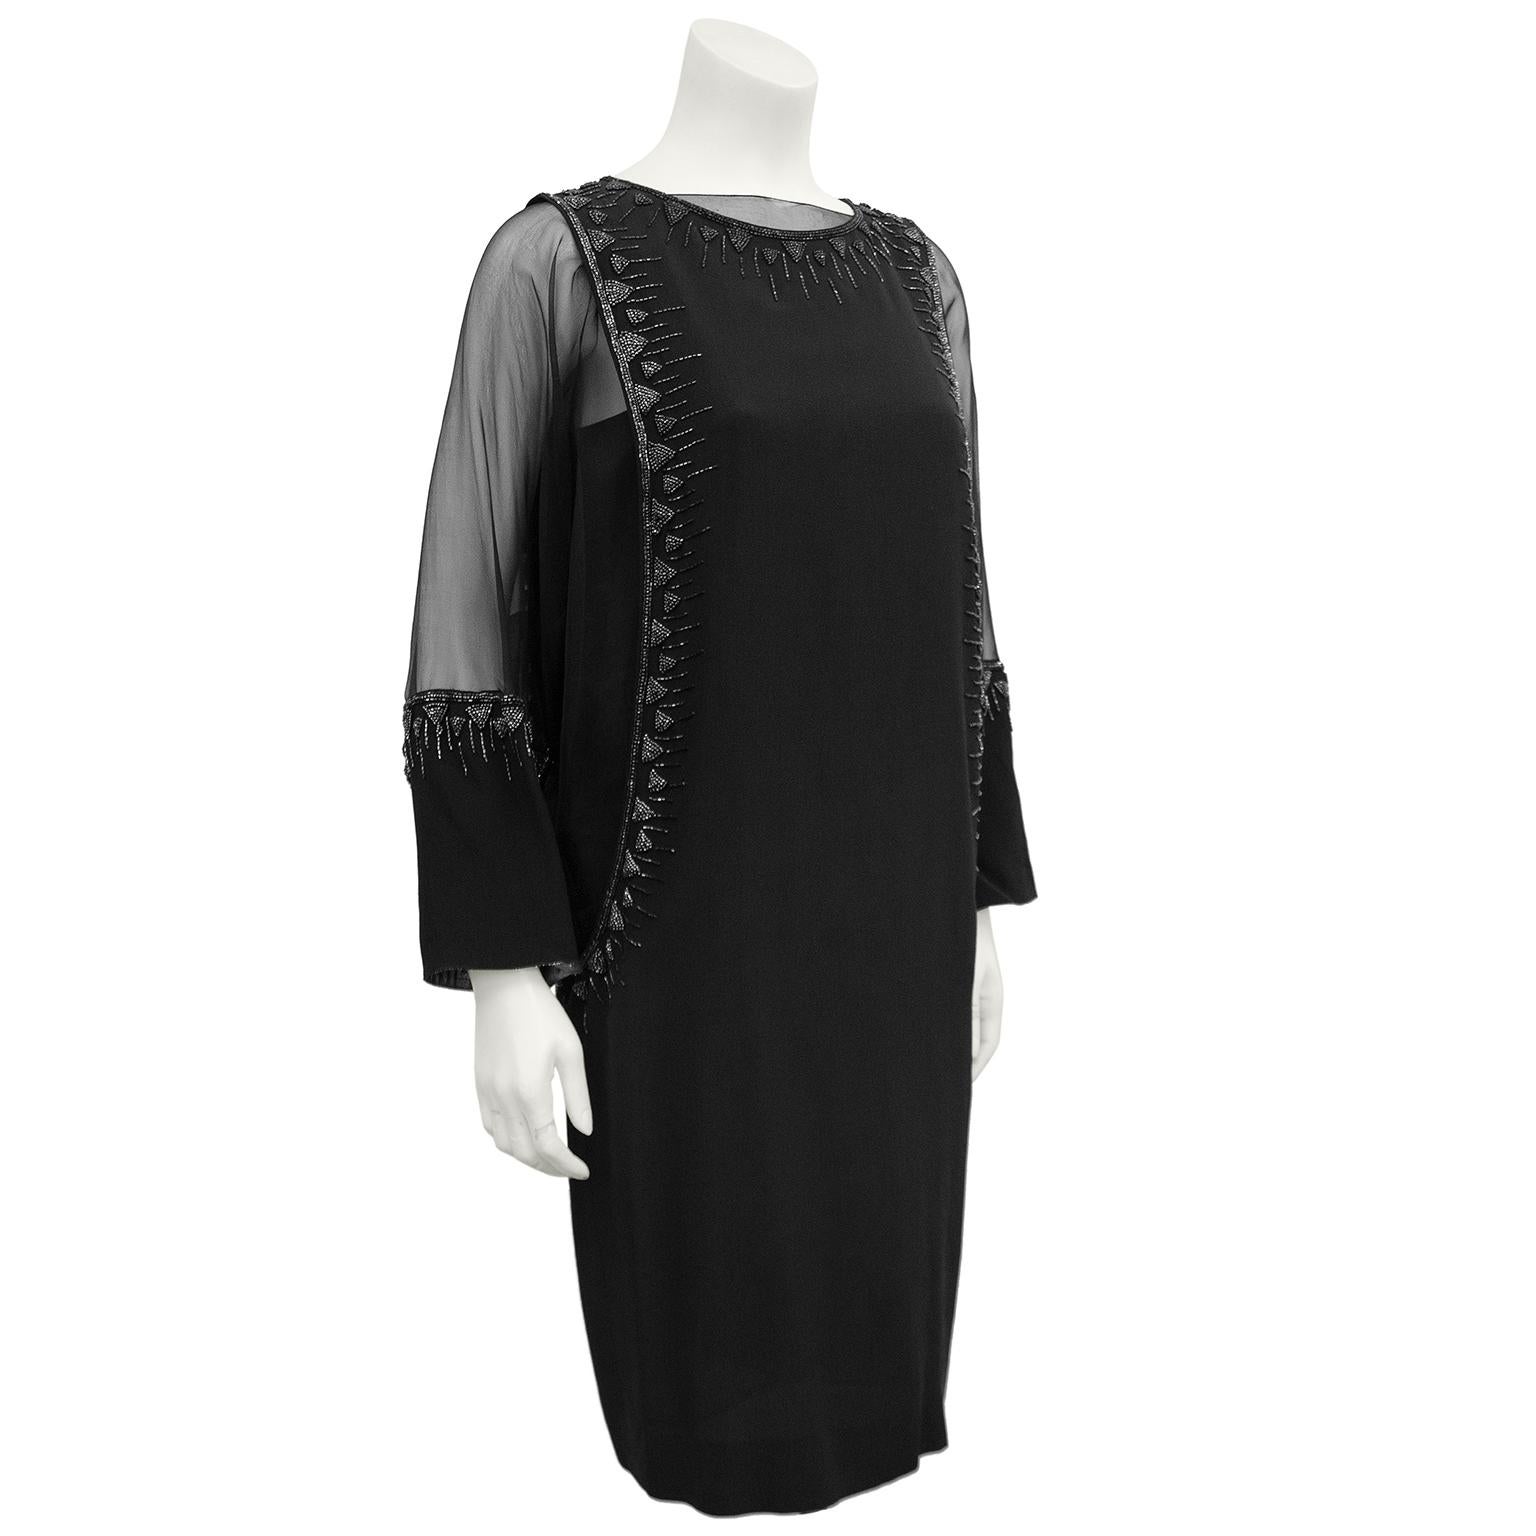 Not your average LBD. 1980s cocktail/black tie dress Inspired by the layered evening dressing of the 1920s. Stunning 3 piece black hand beaded creation . Features a black slip, under a sheer long sleeve black shift with dolman sleeves, pewter beaded